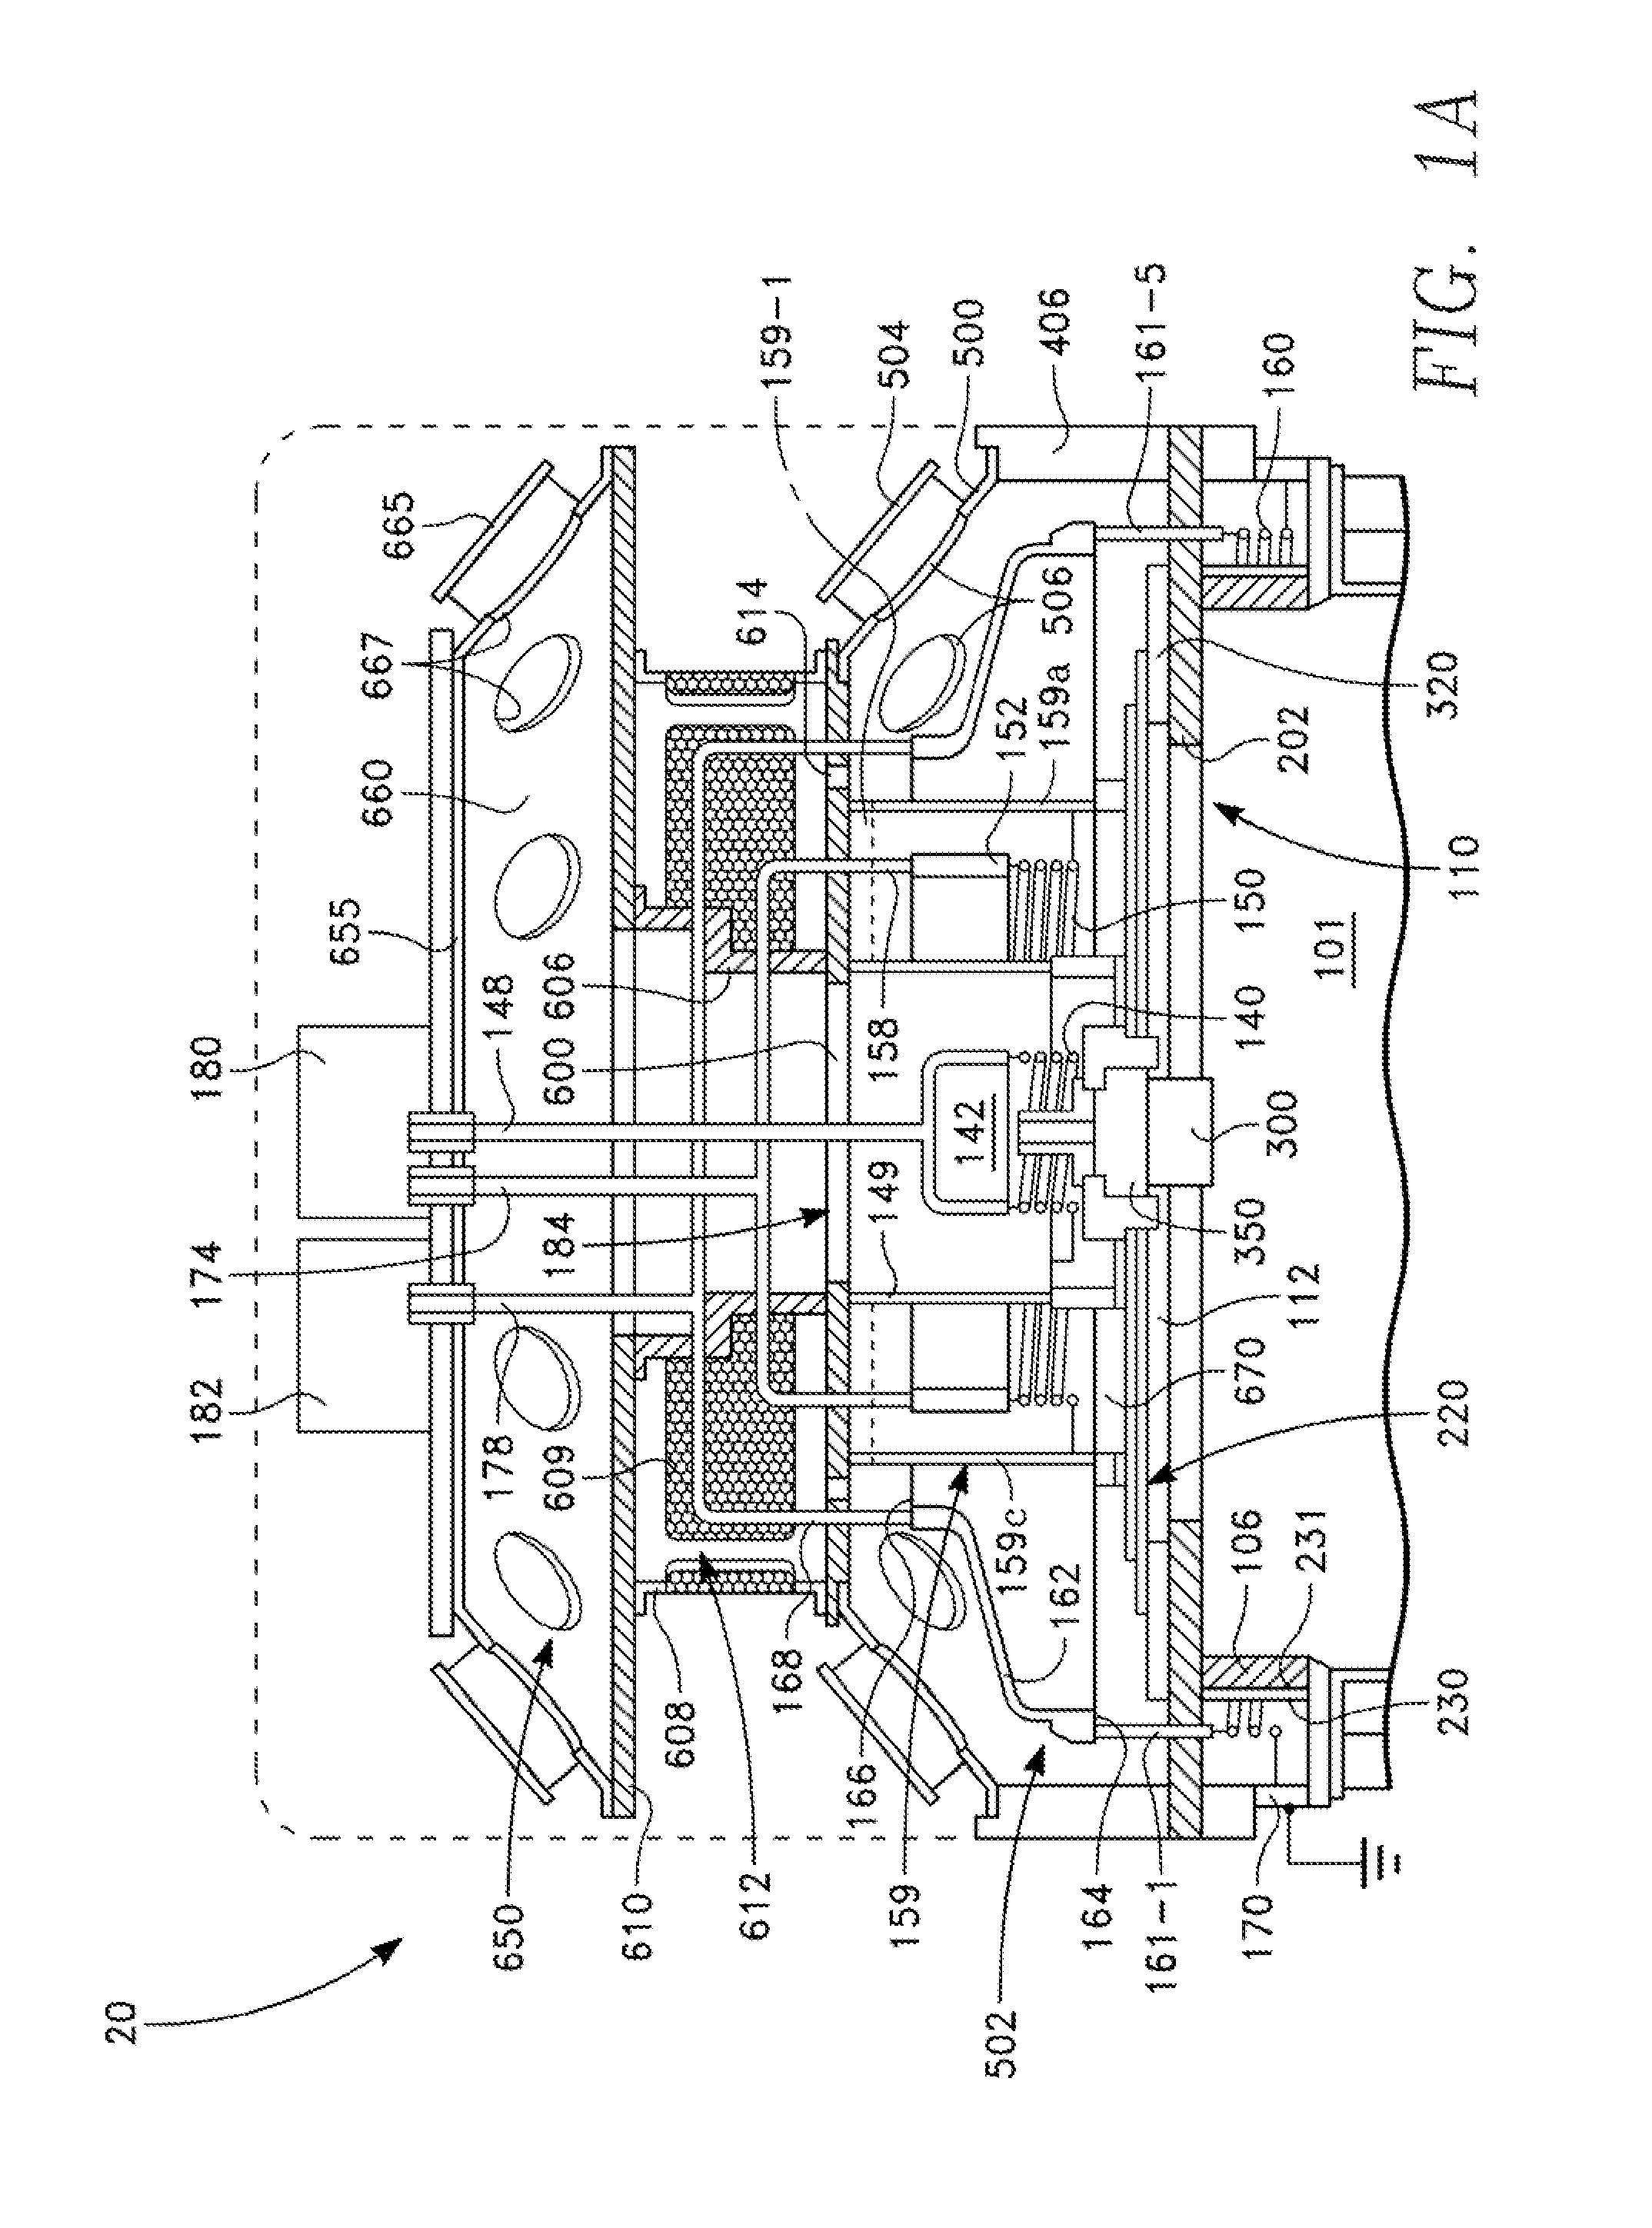 Symmetrical inductively coupled plasma source with symmetrical flow chamber